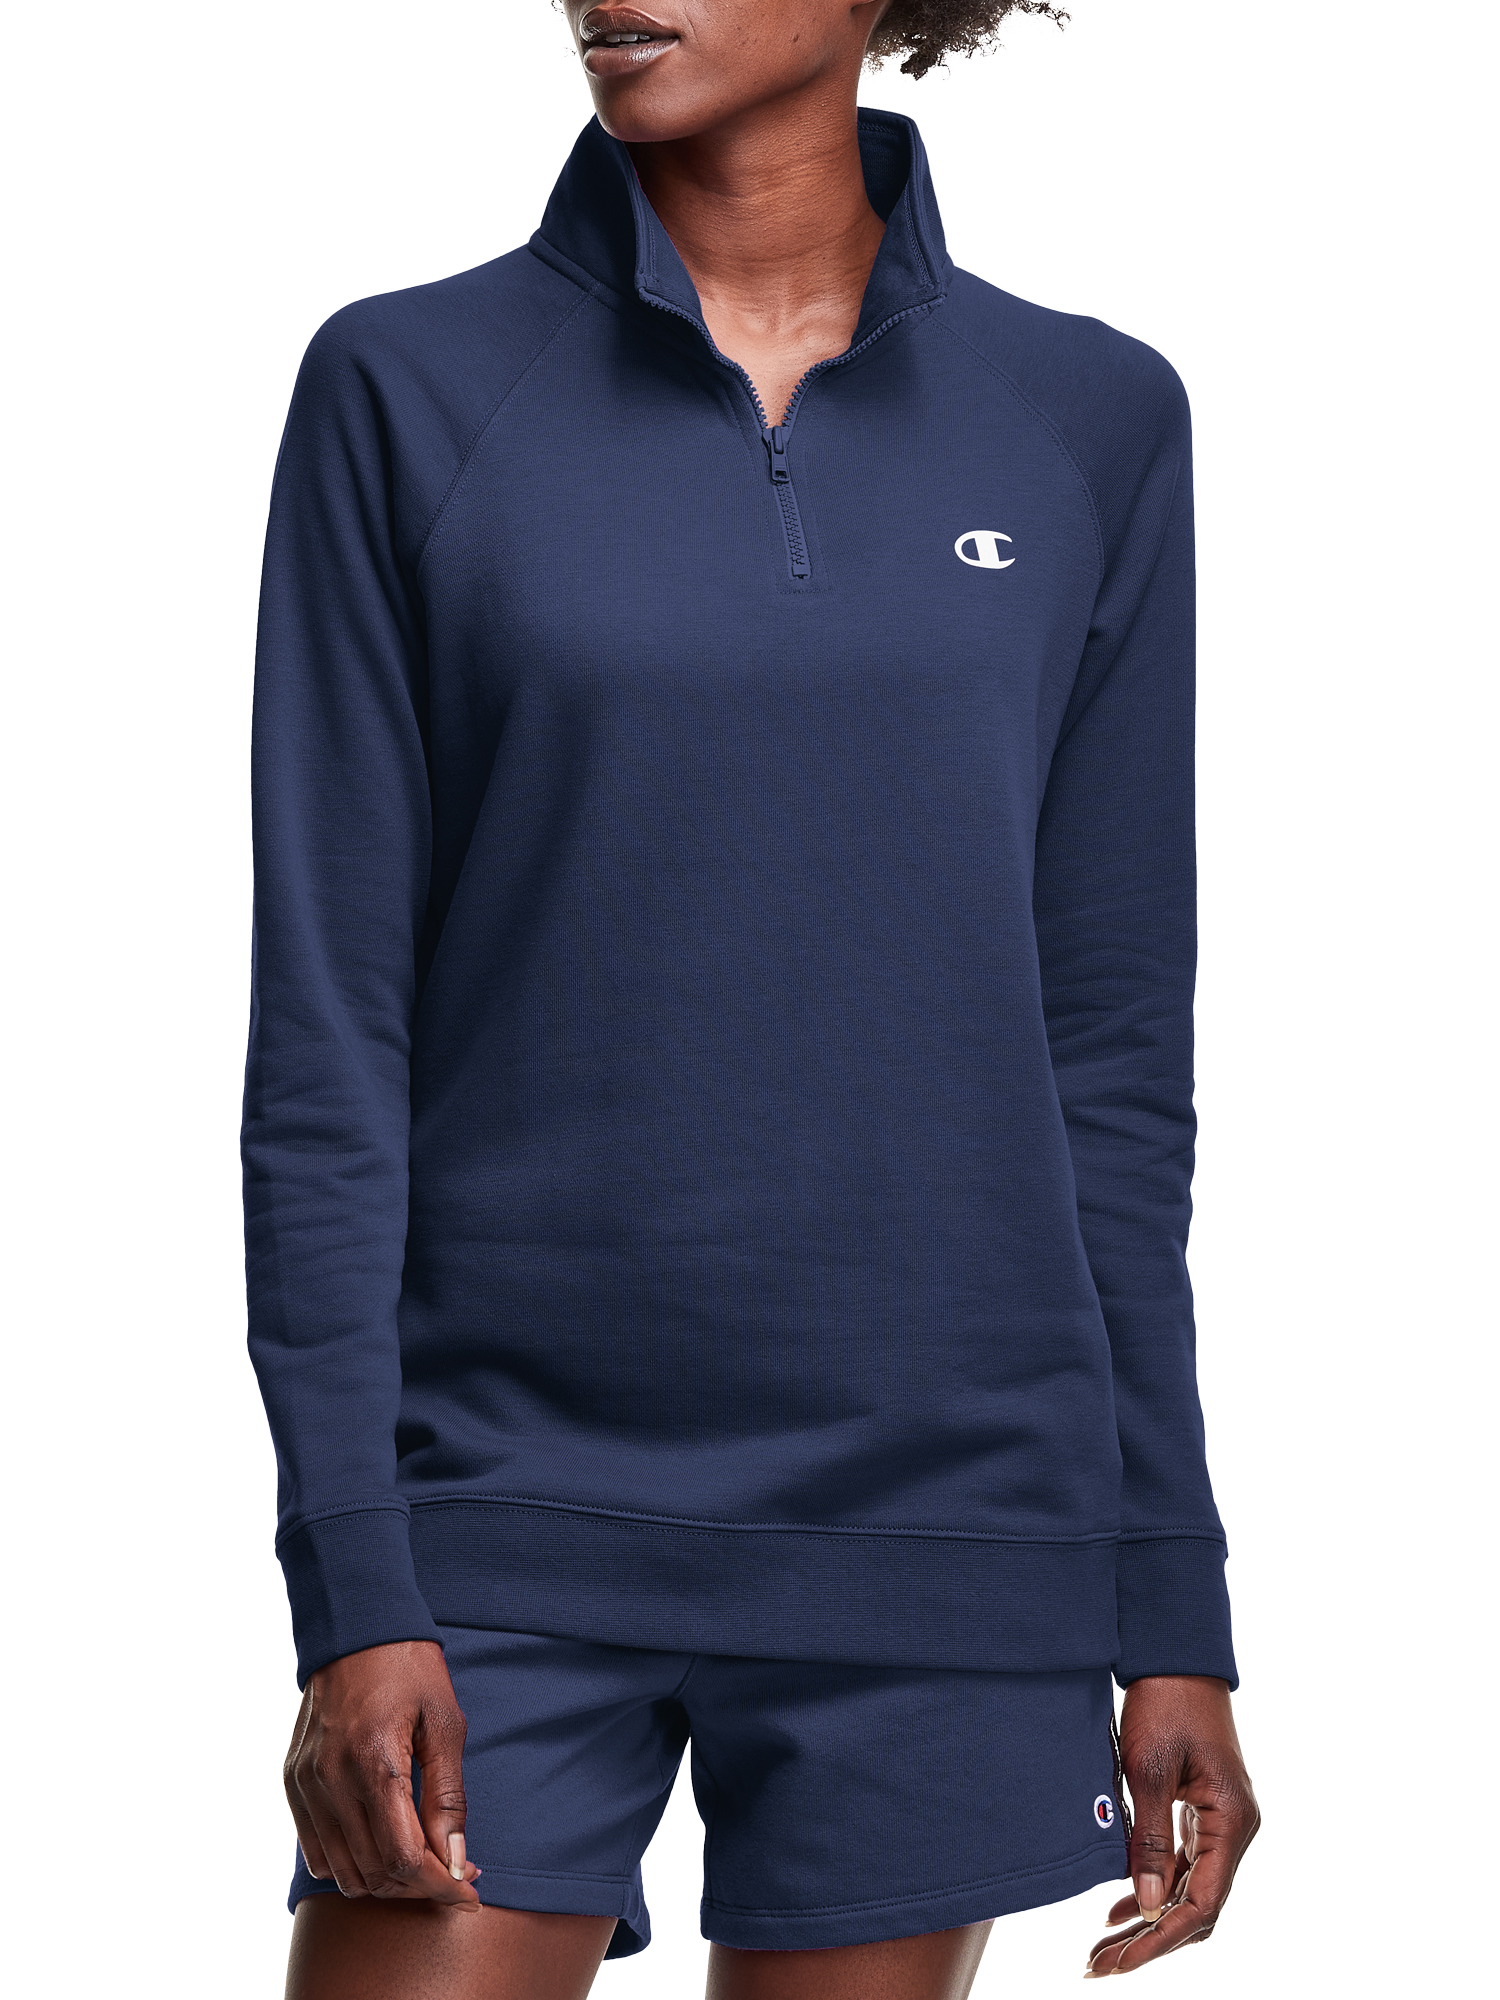 Women's Champion Quarter Zip Pullover (various, limited sizes) $9.96 + FS w/ Walmart+ or FS on $35+